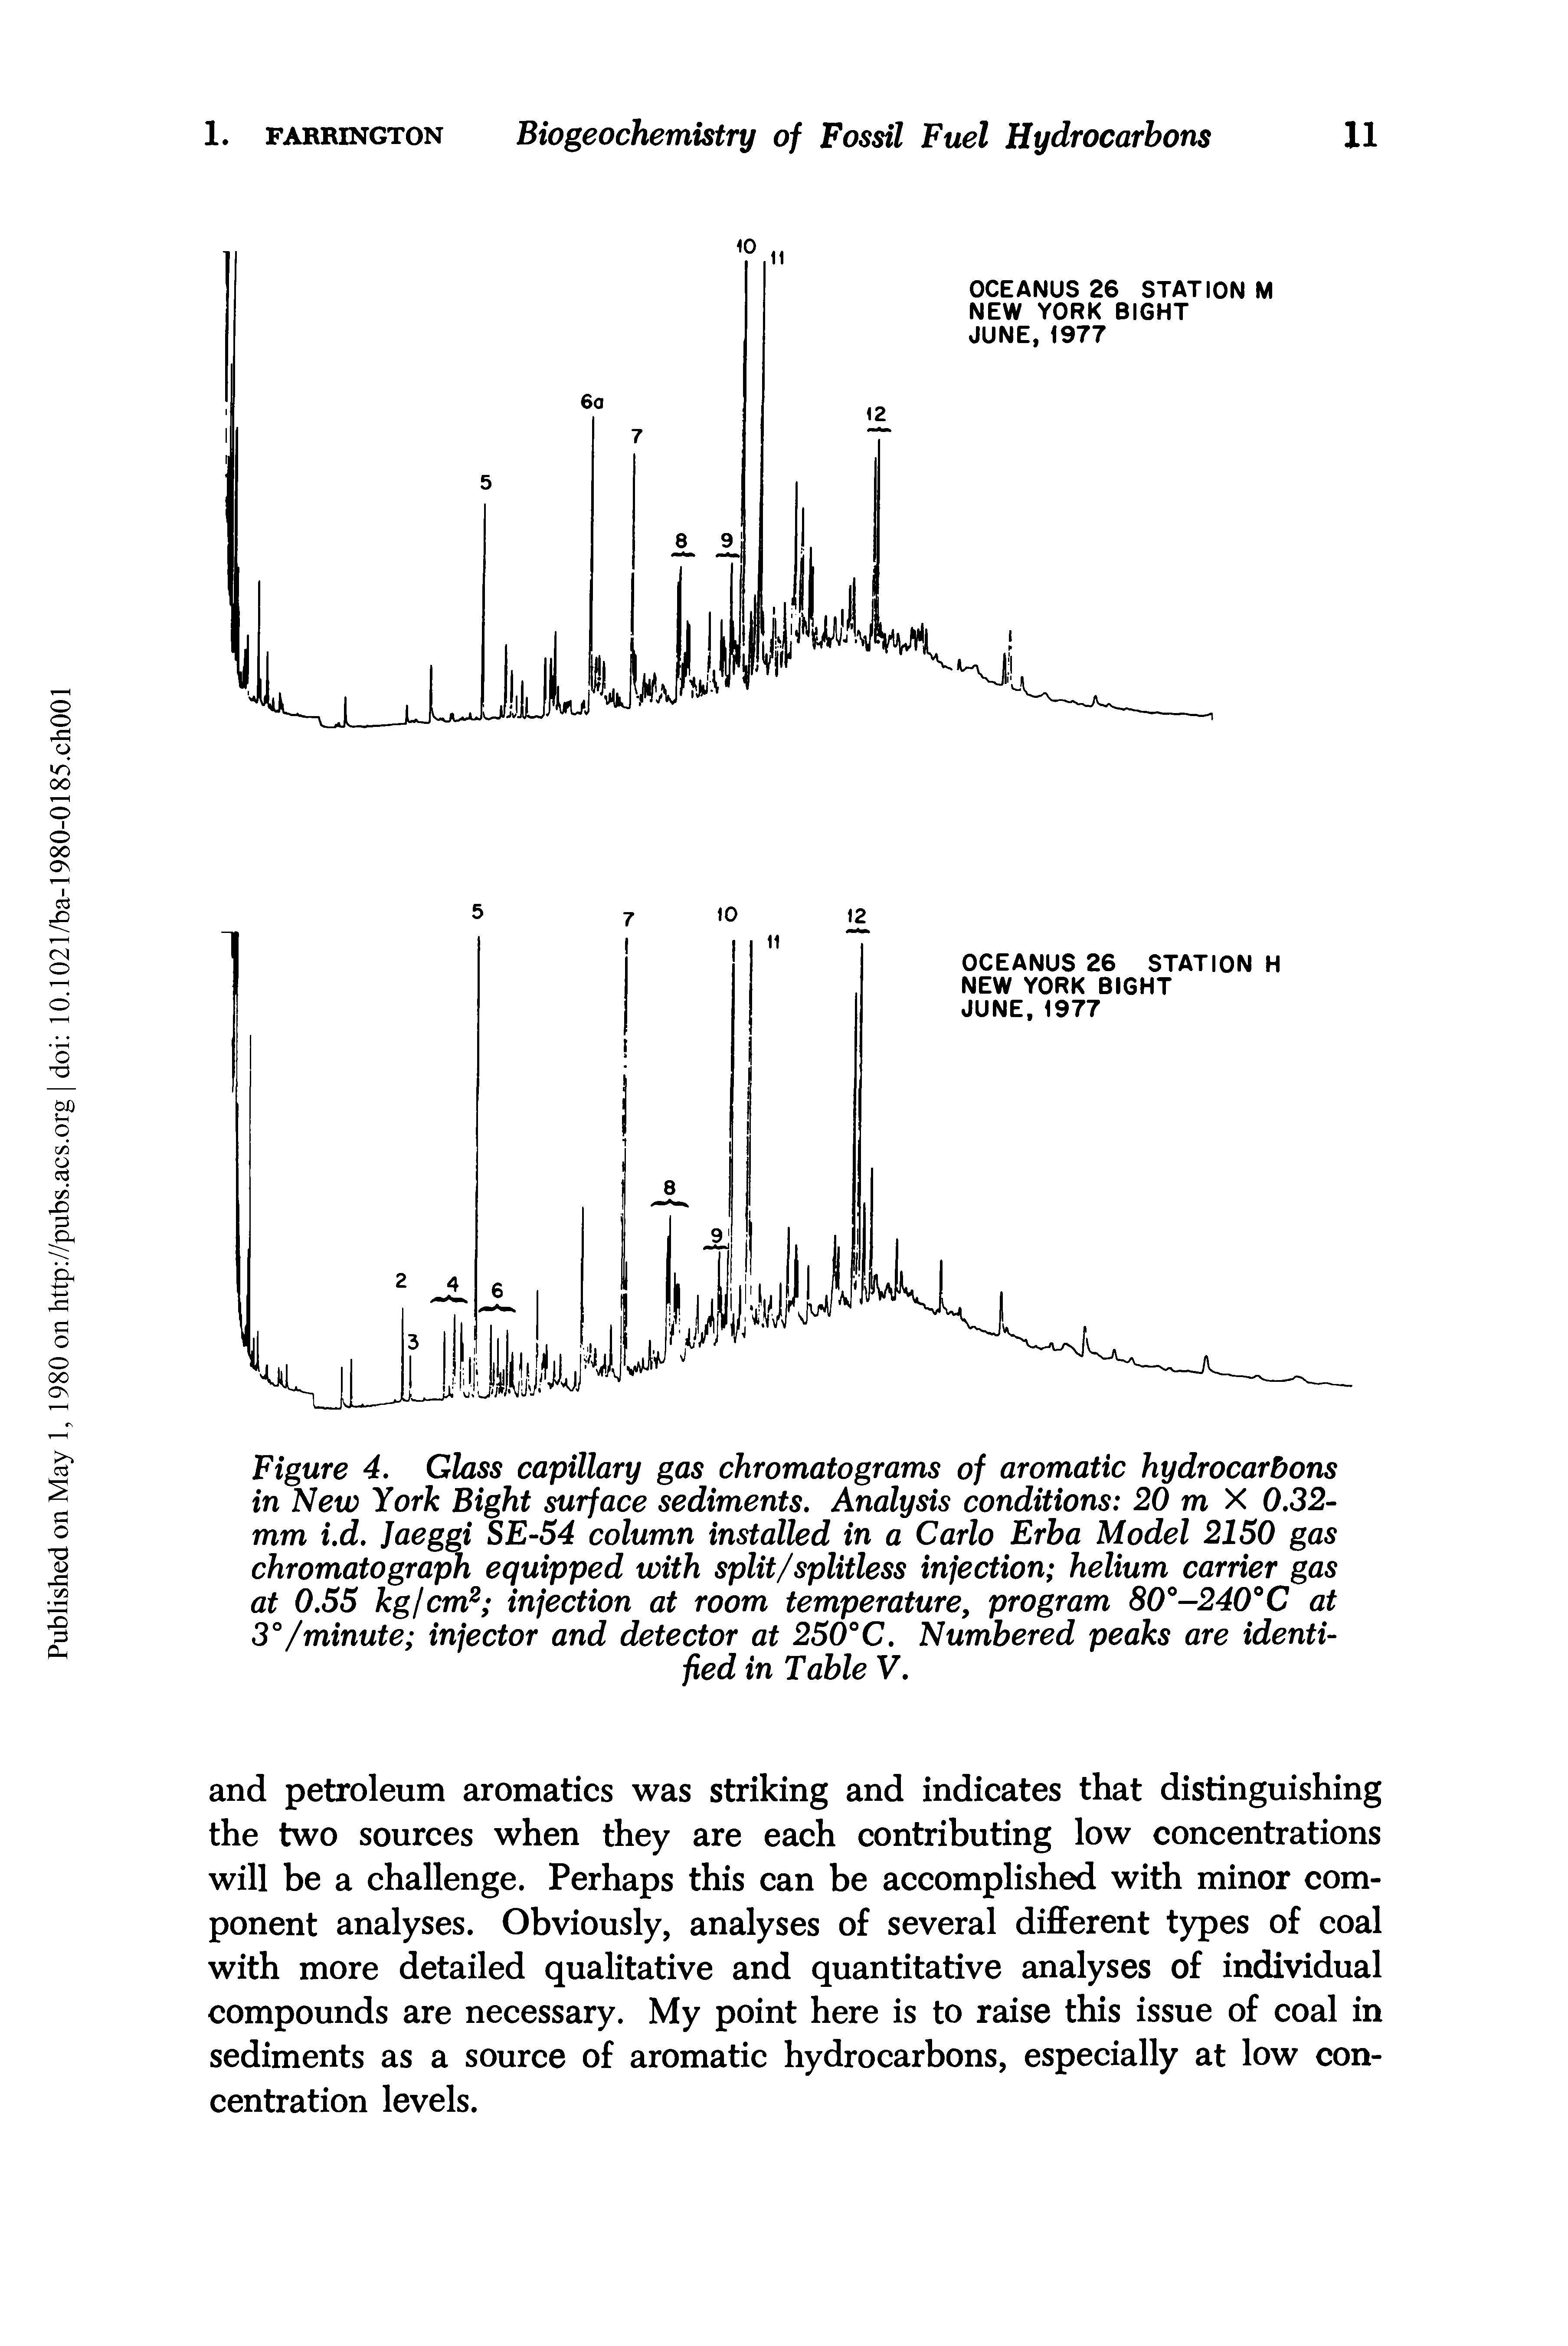 Figure 4. Glass capillary gas chromatograms of aromatic hydrocarbons in New York Bight surface sediments. Analysis conditions 20 m X 0.32-mm i.d. Jaeggi SE-54 column installed in a Carlo Erba Model 2150 gas chromatograph equipped with split/splitless injection helium carrier gas at 0.55 kg/cm2 injection at room temperature, program 80°-240°C at 3°/minute injector and detector at 250°C. Numbered peaks are identified in Table V.